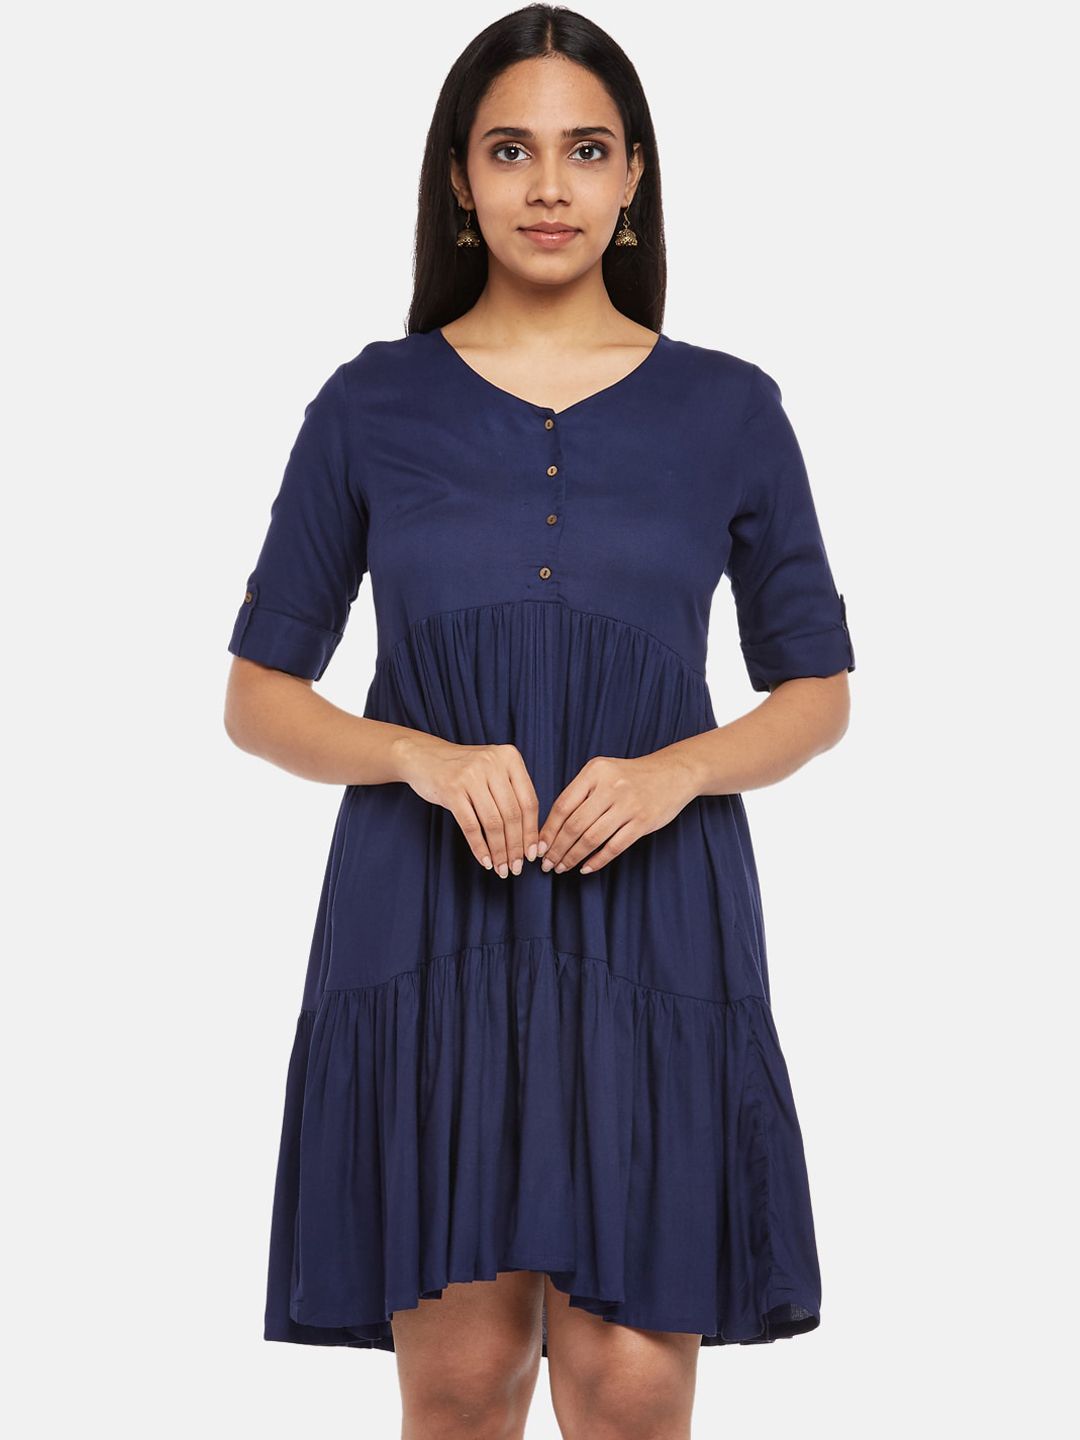 AKKRITI BY PANTALOONS Women Navy Blue Solid A-Line Dress with Scarf Price in India